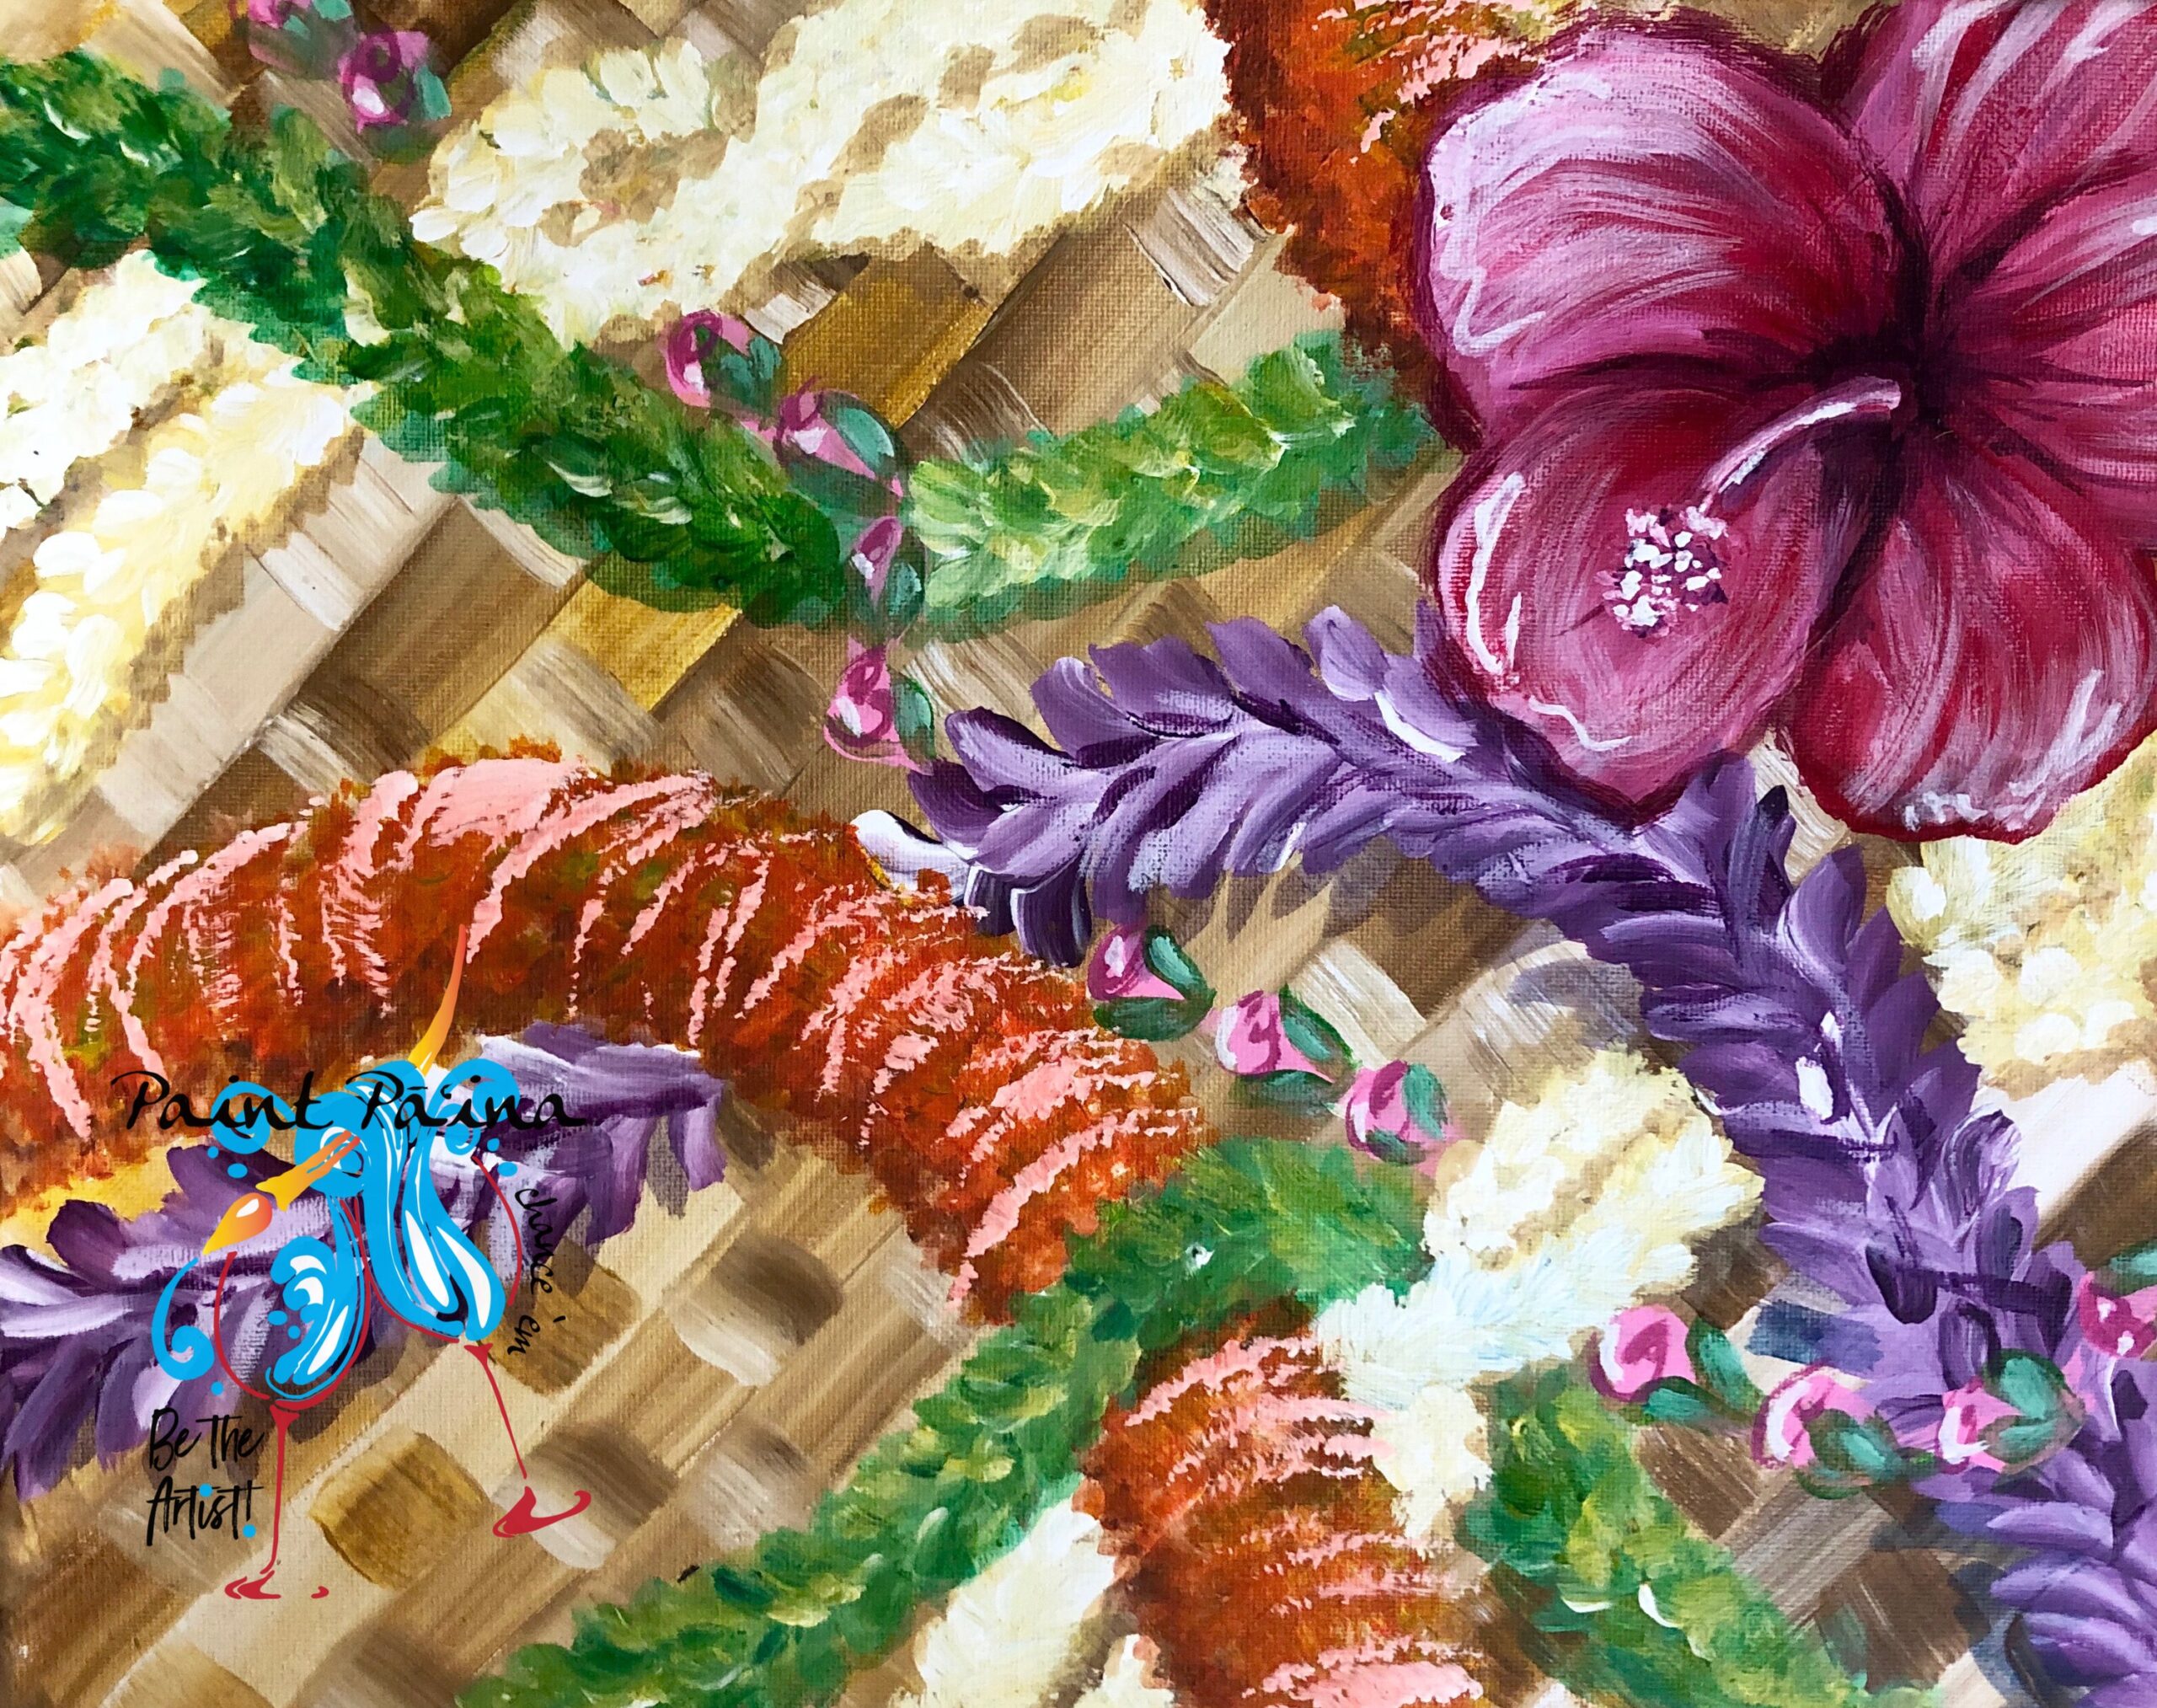 Paint Pāʻina & Ko’olau Distillery – Every Day is Lei Day in Hawaii!